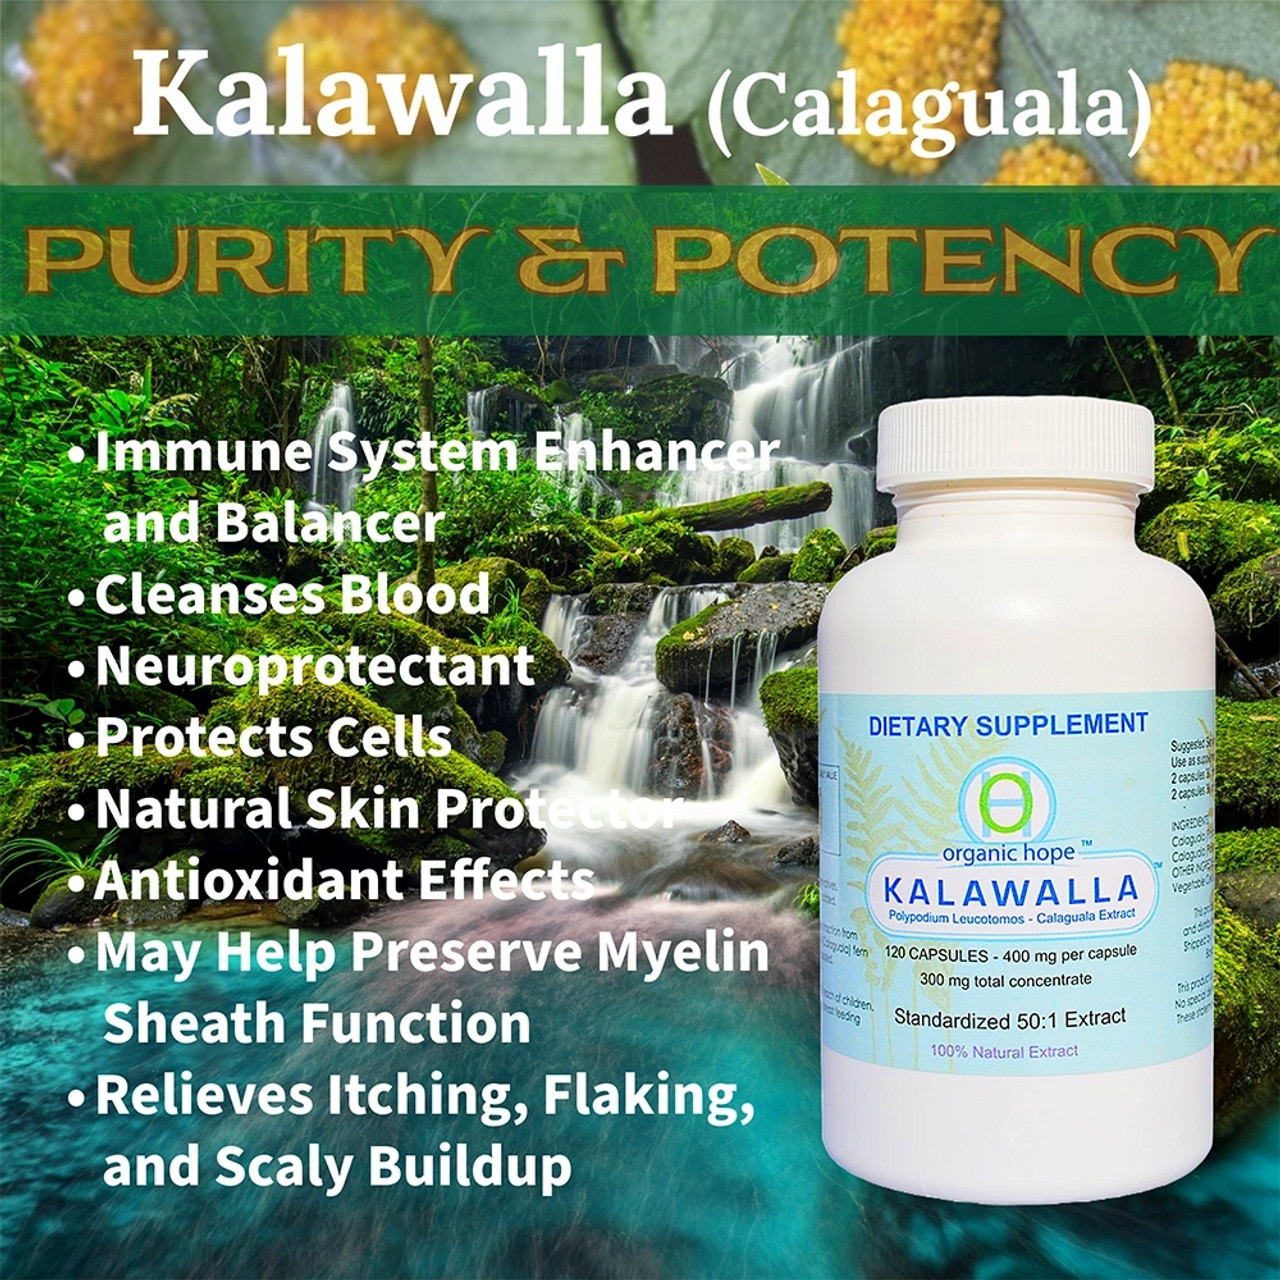 PURITY & POTENCY: Kalawalla is manufactured under cGMP compliant processes so you are assured to receive a top quality product. Kalawalla is NON-GMO, and does not contain preservatives, fillers, artificial colors, flavors, sugar, soy, dairy, corn, gluten or wheat. Organic Hope Kalawalla formula is clean and pure. Our vegan friendly polypodium herb is made with vegetable cellulose capsules, making it a perfect choice for everyone. Every batch is quality tested for purity and potency. Our polypodium leucotomos extracts are certified by four different independent laboratories for purity and quality.